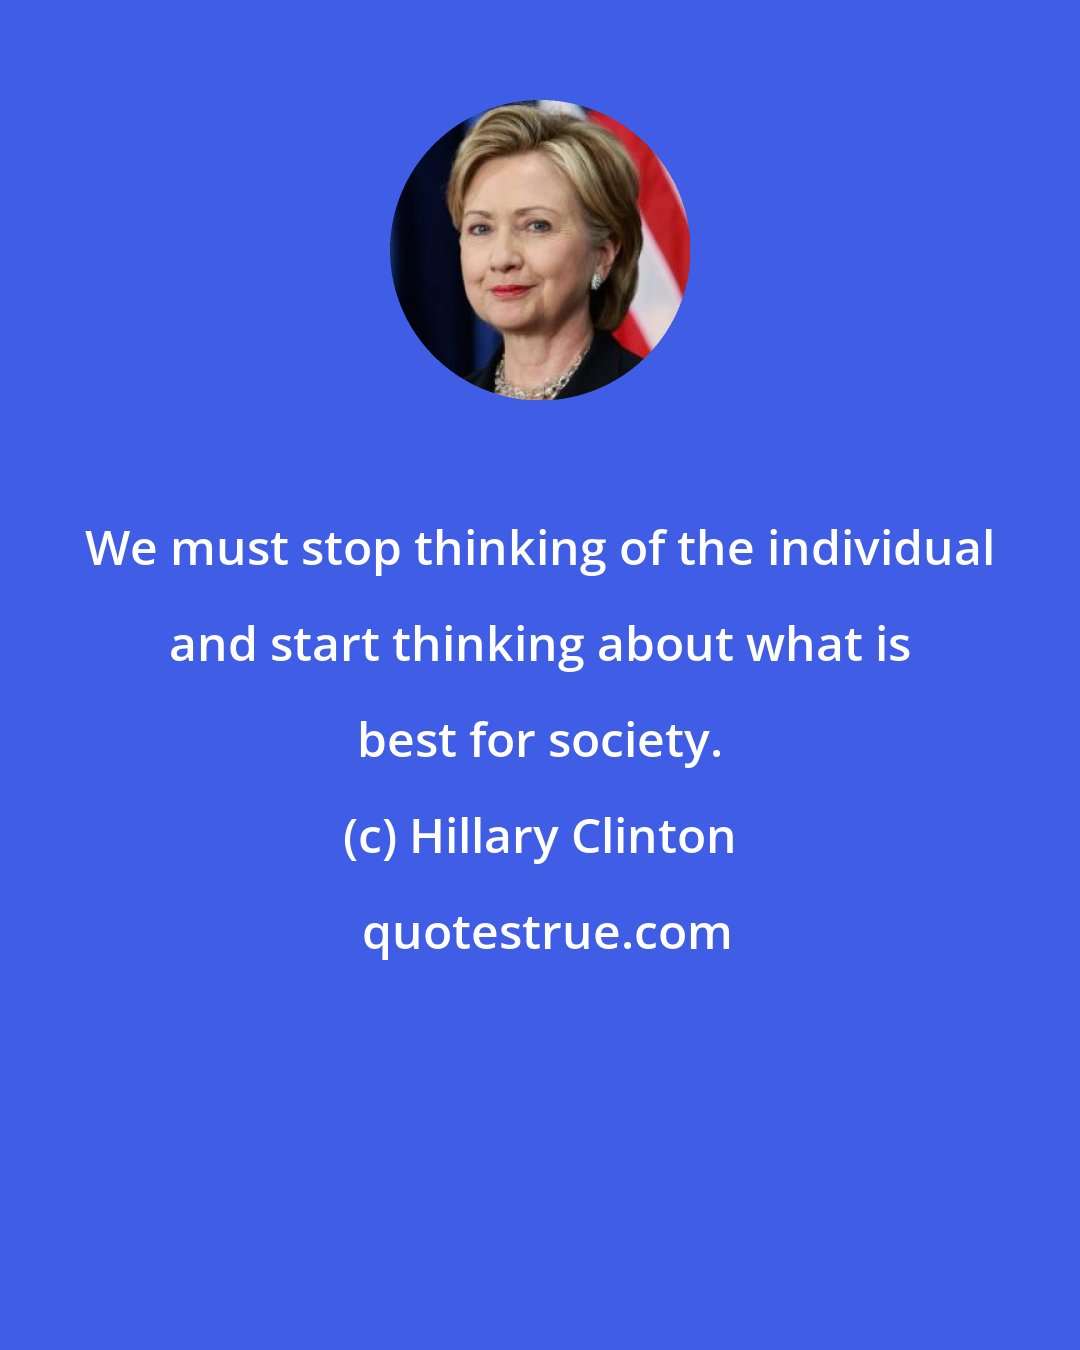 Hillary Clinton: We must stop thinking of the individual and start thinking about what is best for society.